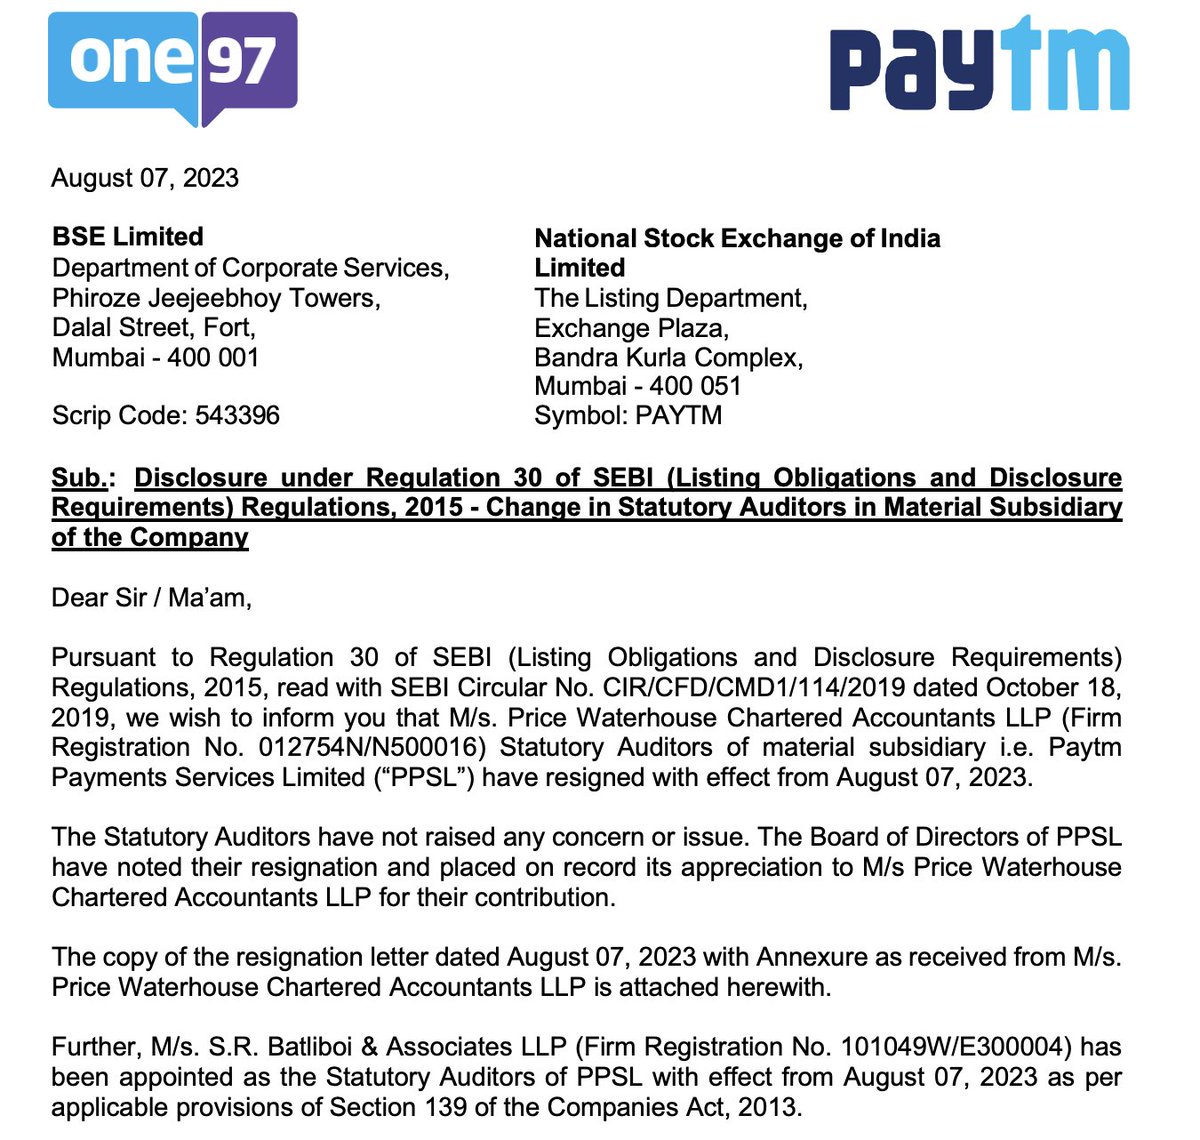 🚨 Paytm Payment Services' statutory auditor PWC has resigned

The firm has appointed SR Batliboi (network firm of EY) as the new auditor